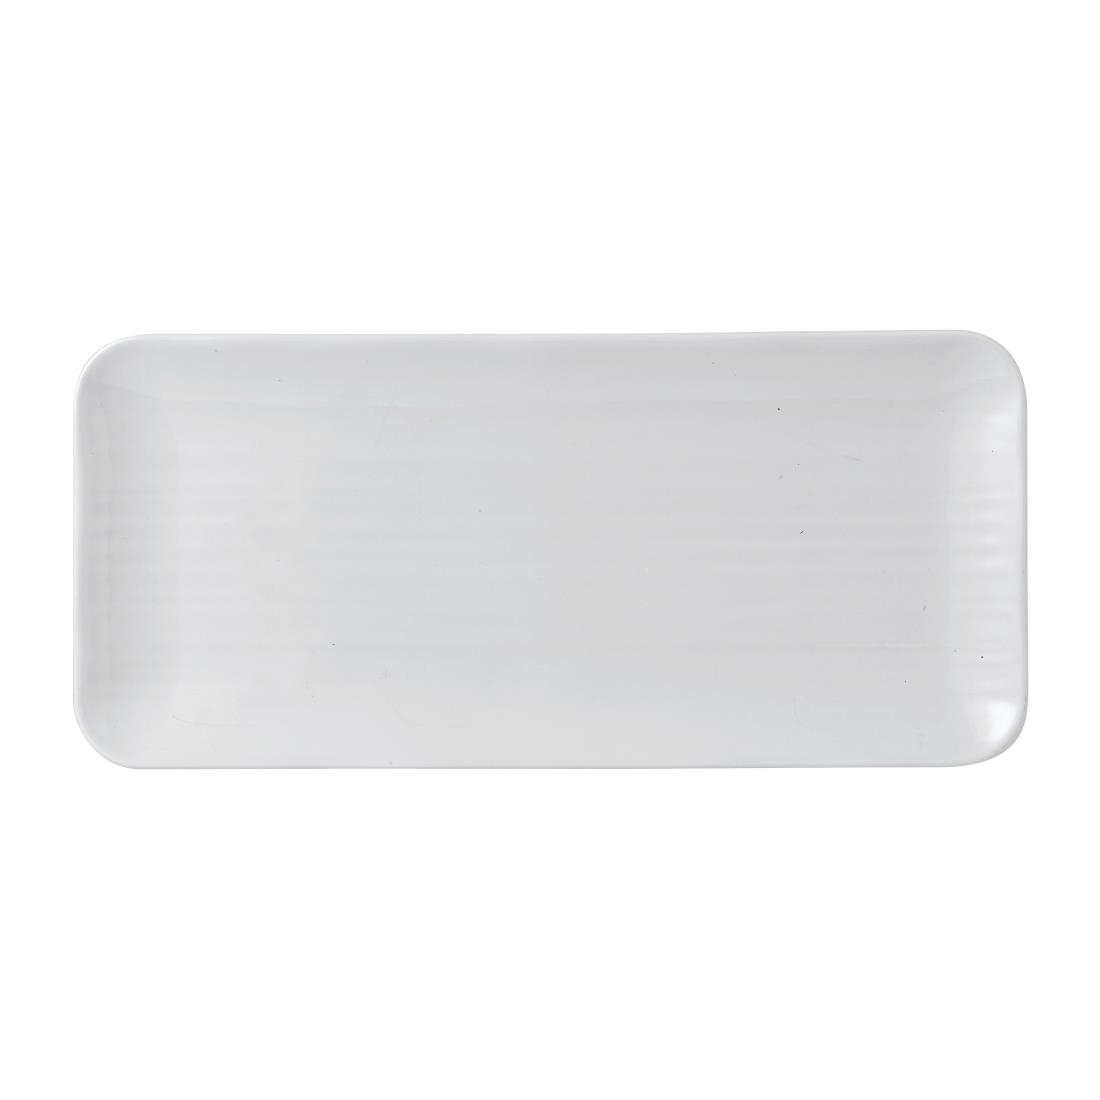 Dudson White Organic Coupe Rect Platter 349 x 158mm (Pack of 6)